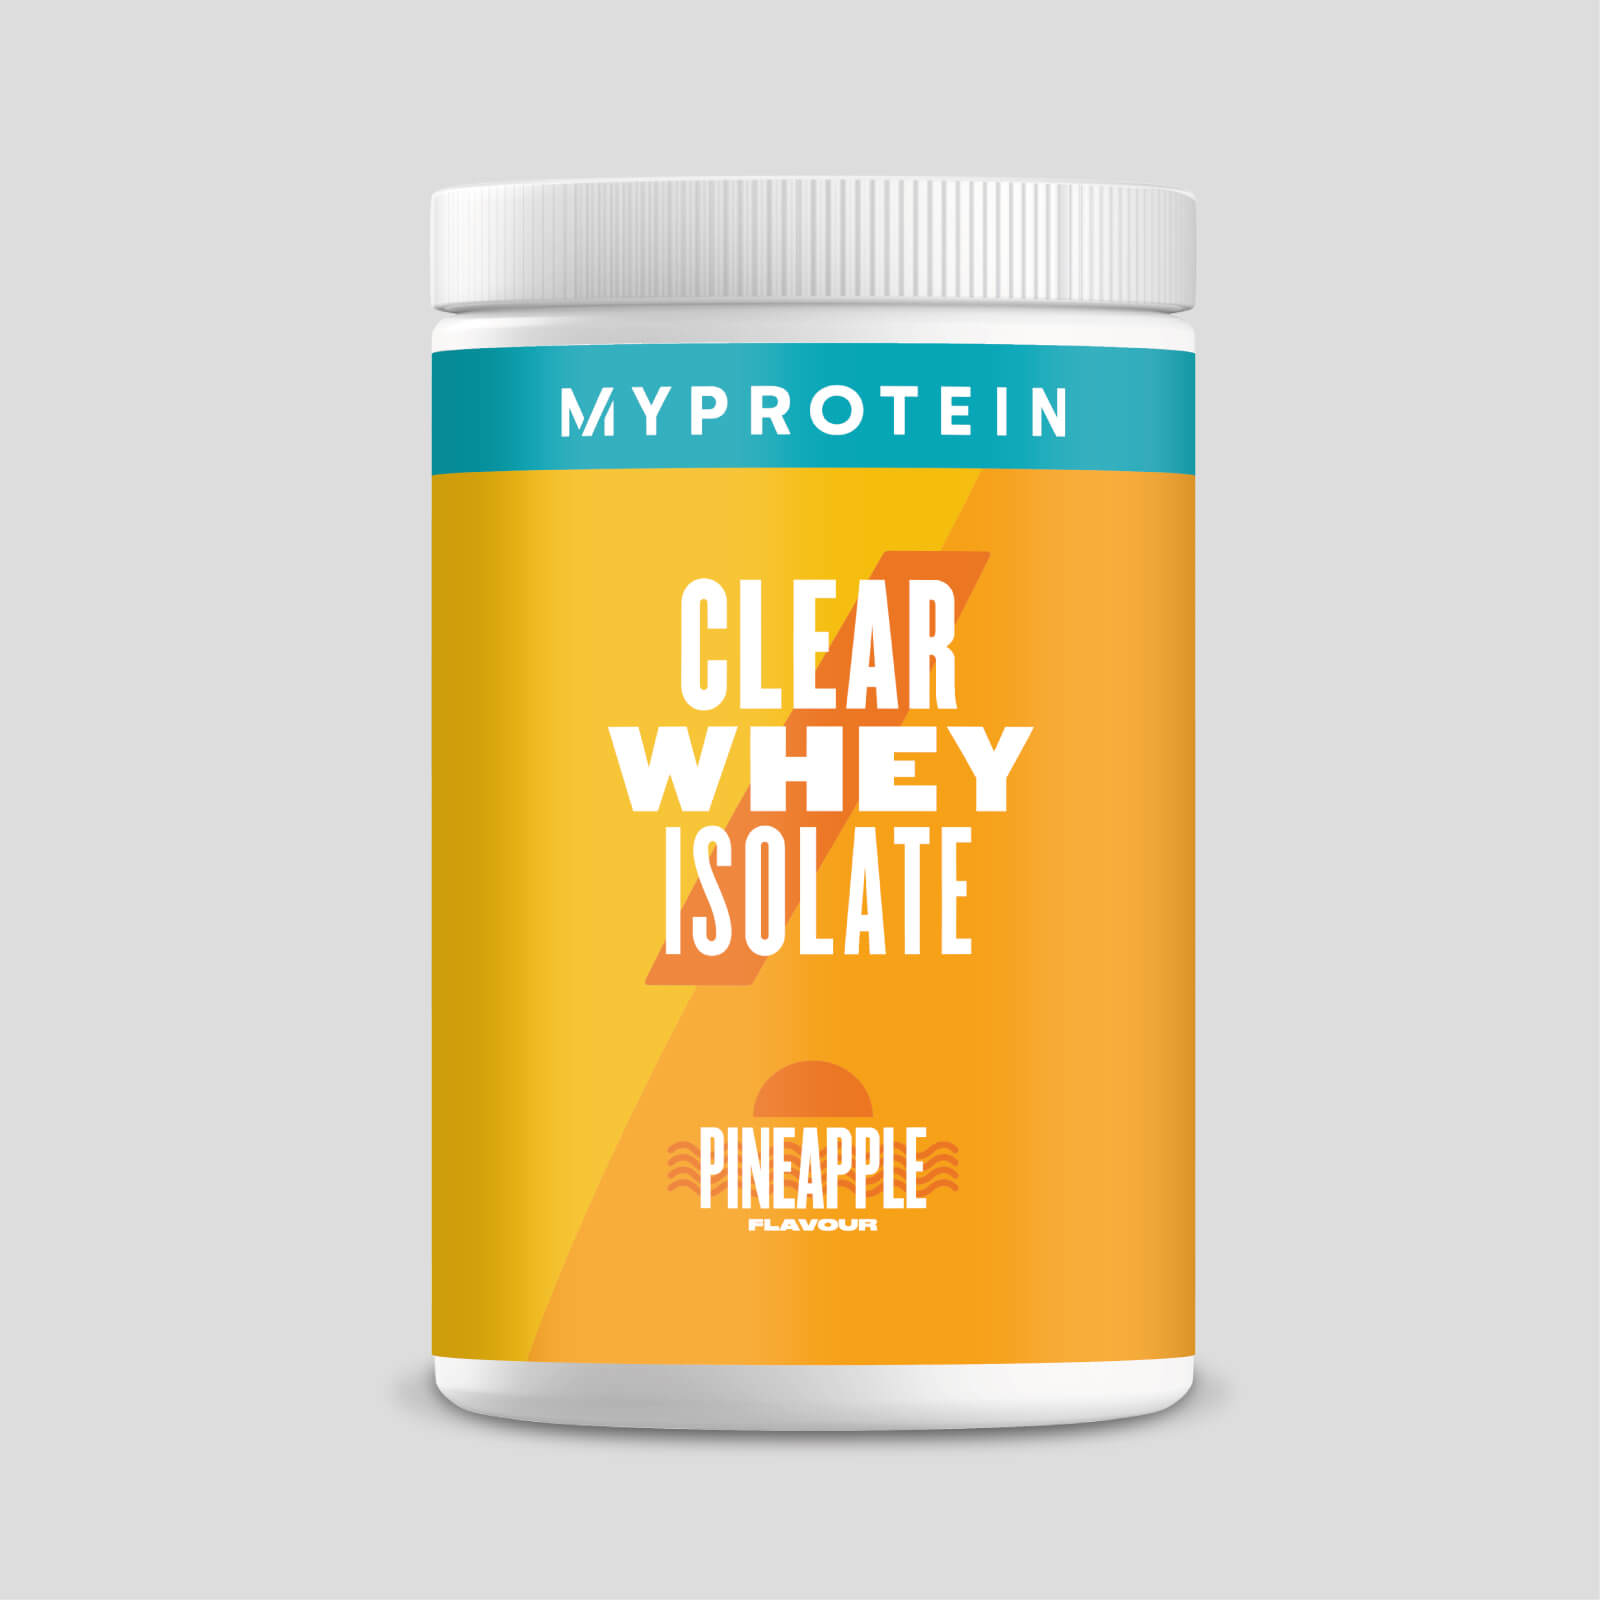 Myprotein Clear Whey Isolat - 20servings - Pineapple - New